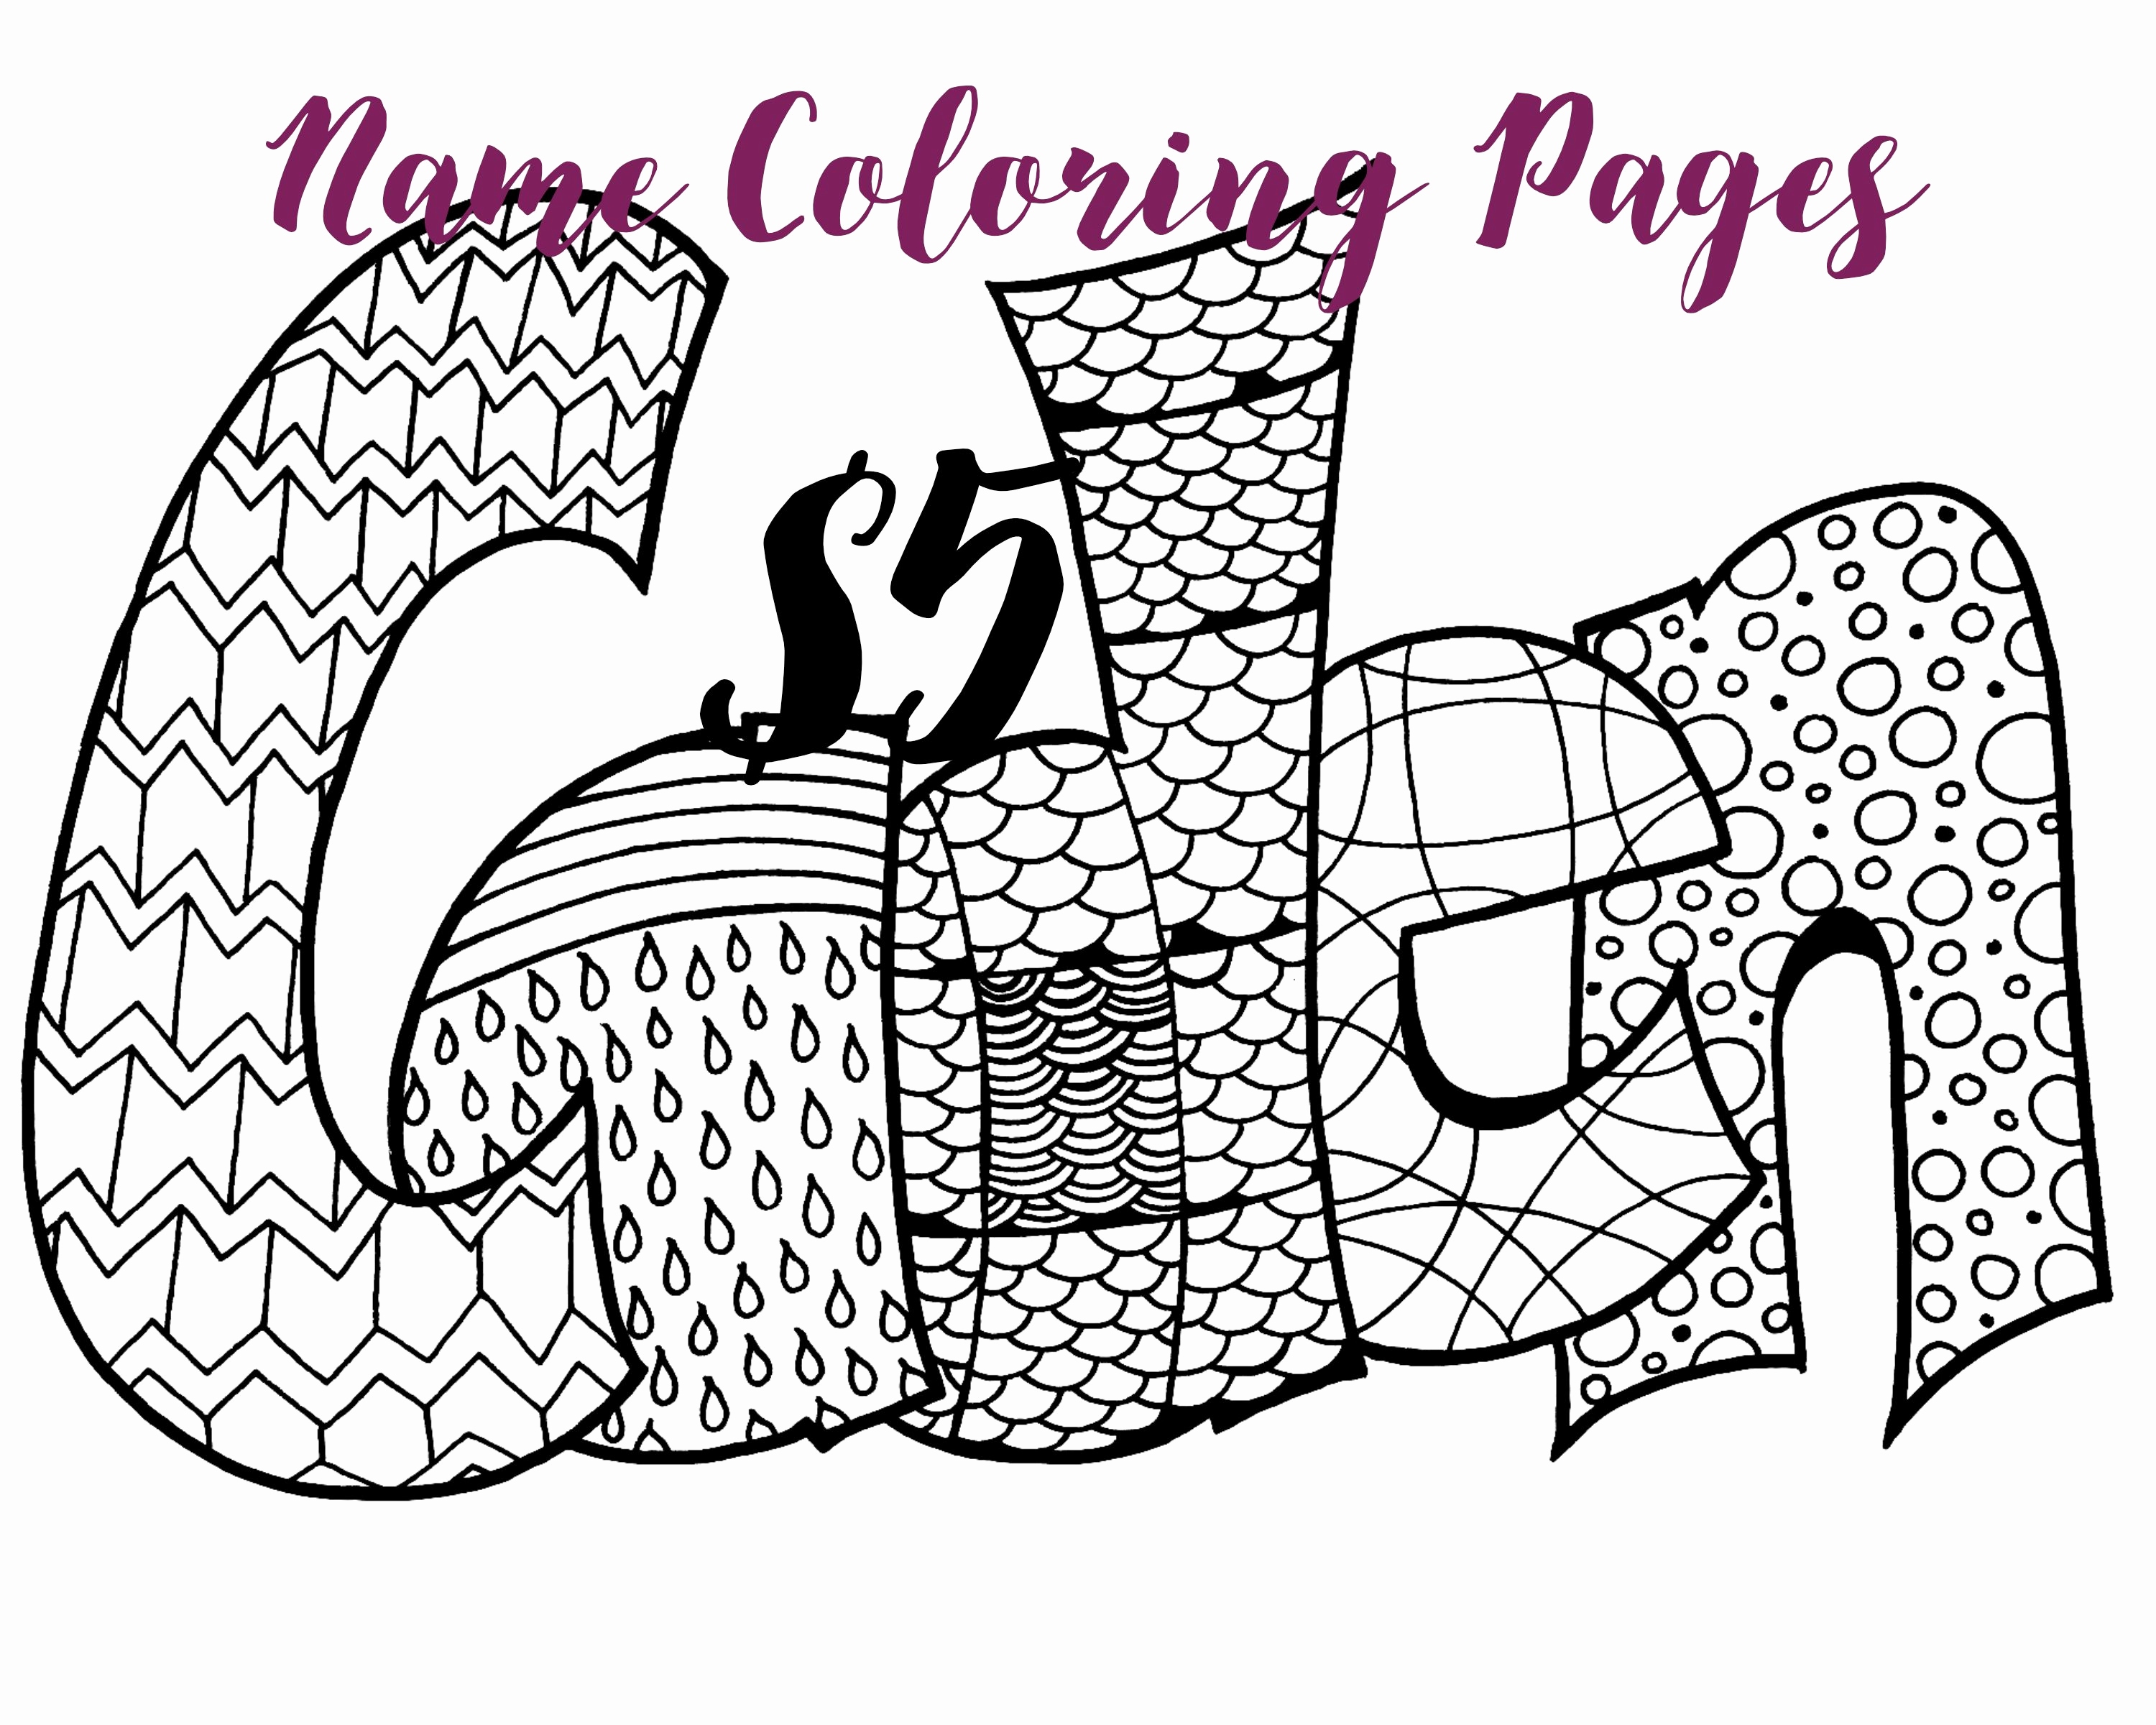 Custom Coloring Pages at Free printable colorings